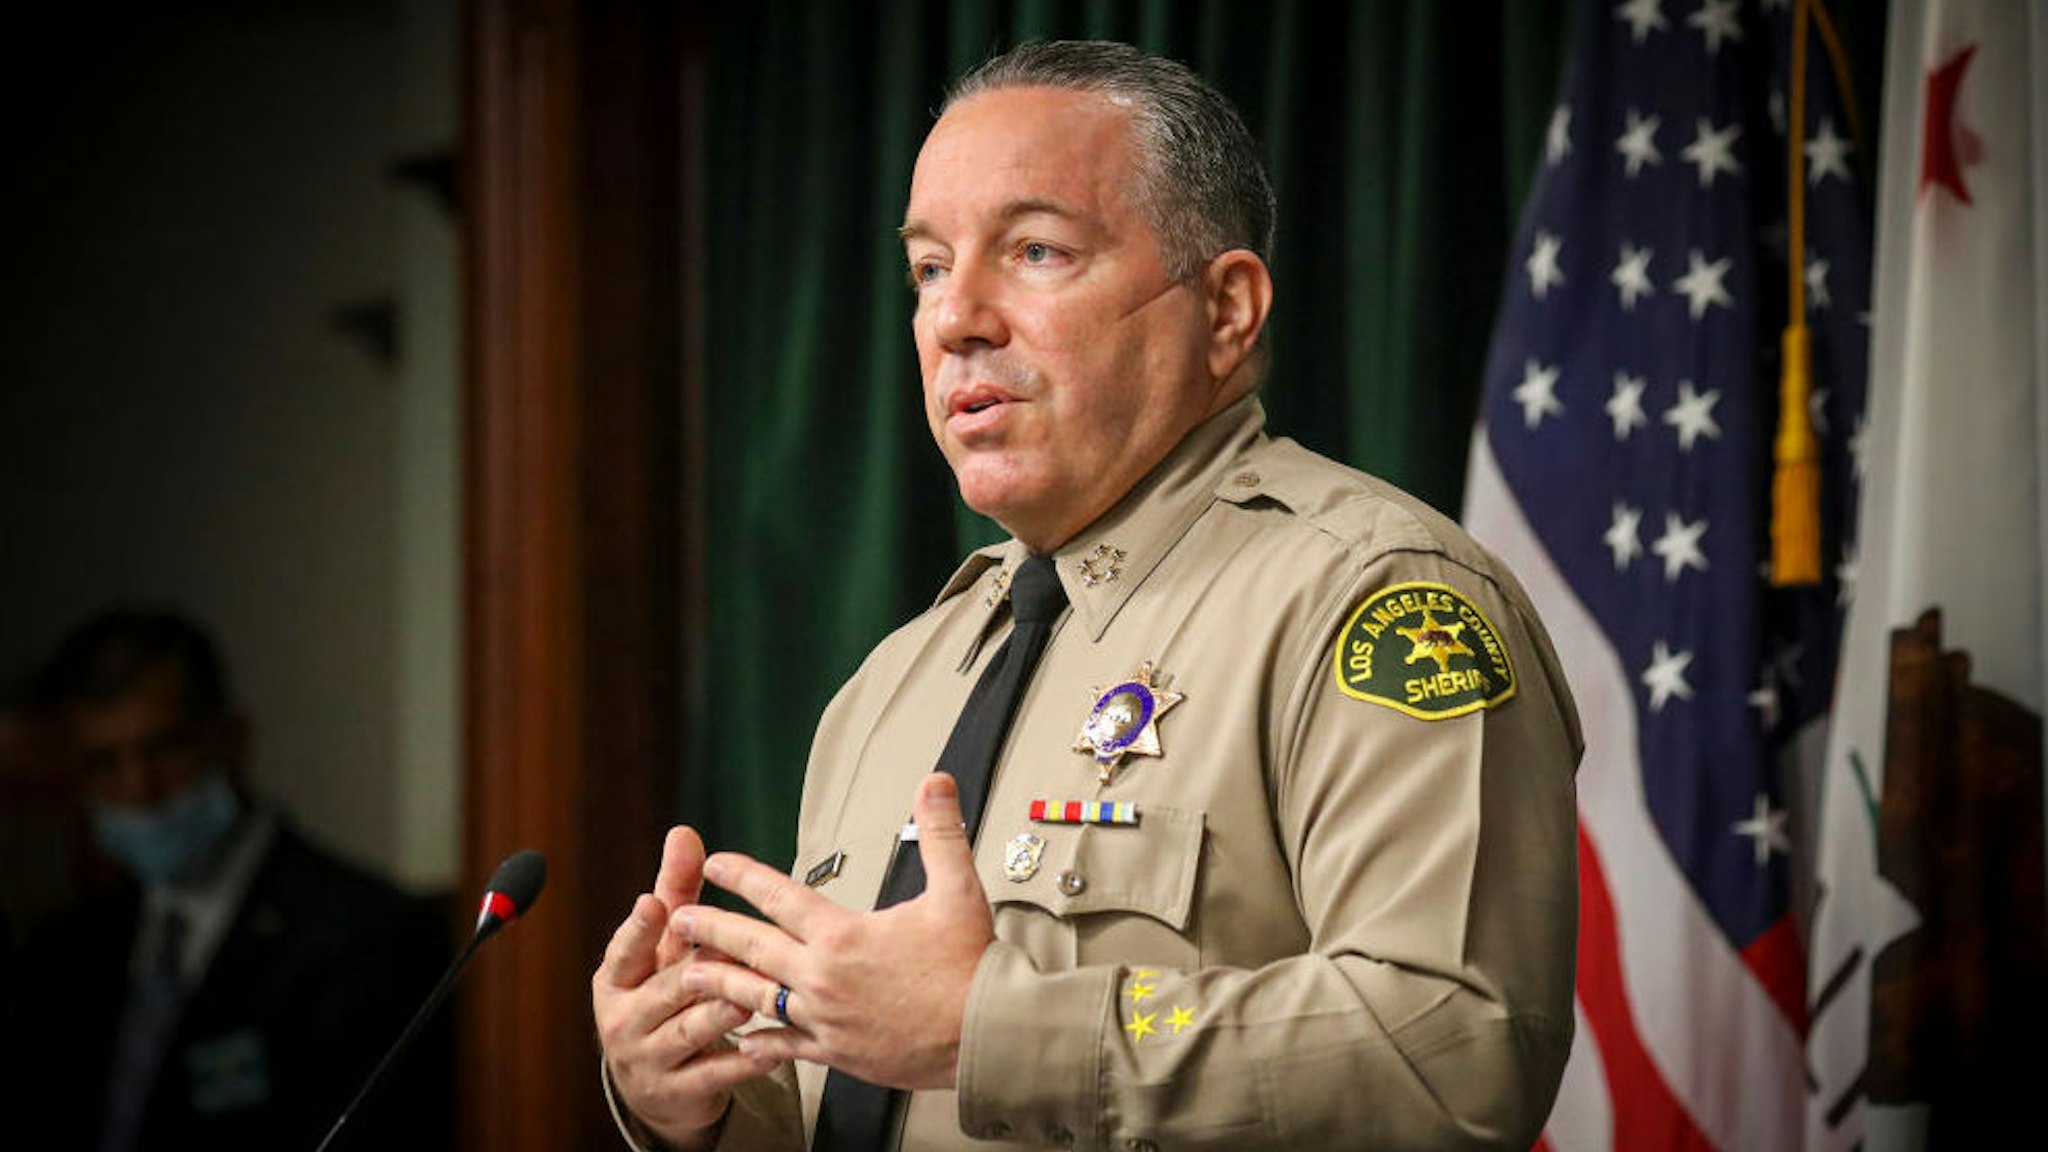 LOS ANGELES, CA - AUGUST 12: Sheriff Alex Villanueva speaks at a news conference to give an update on the fatal shooting by a deputy of Andres Guardado on June 18 near Gardena. in Hall of Justice on Wednesday, Aug. 12, 2020 in Los Angeles, CA.